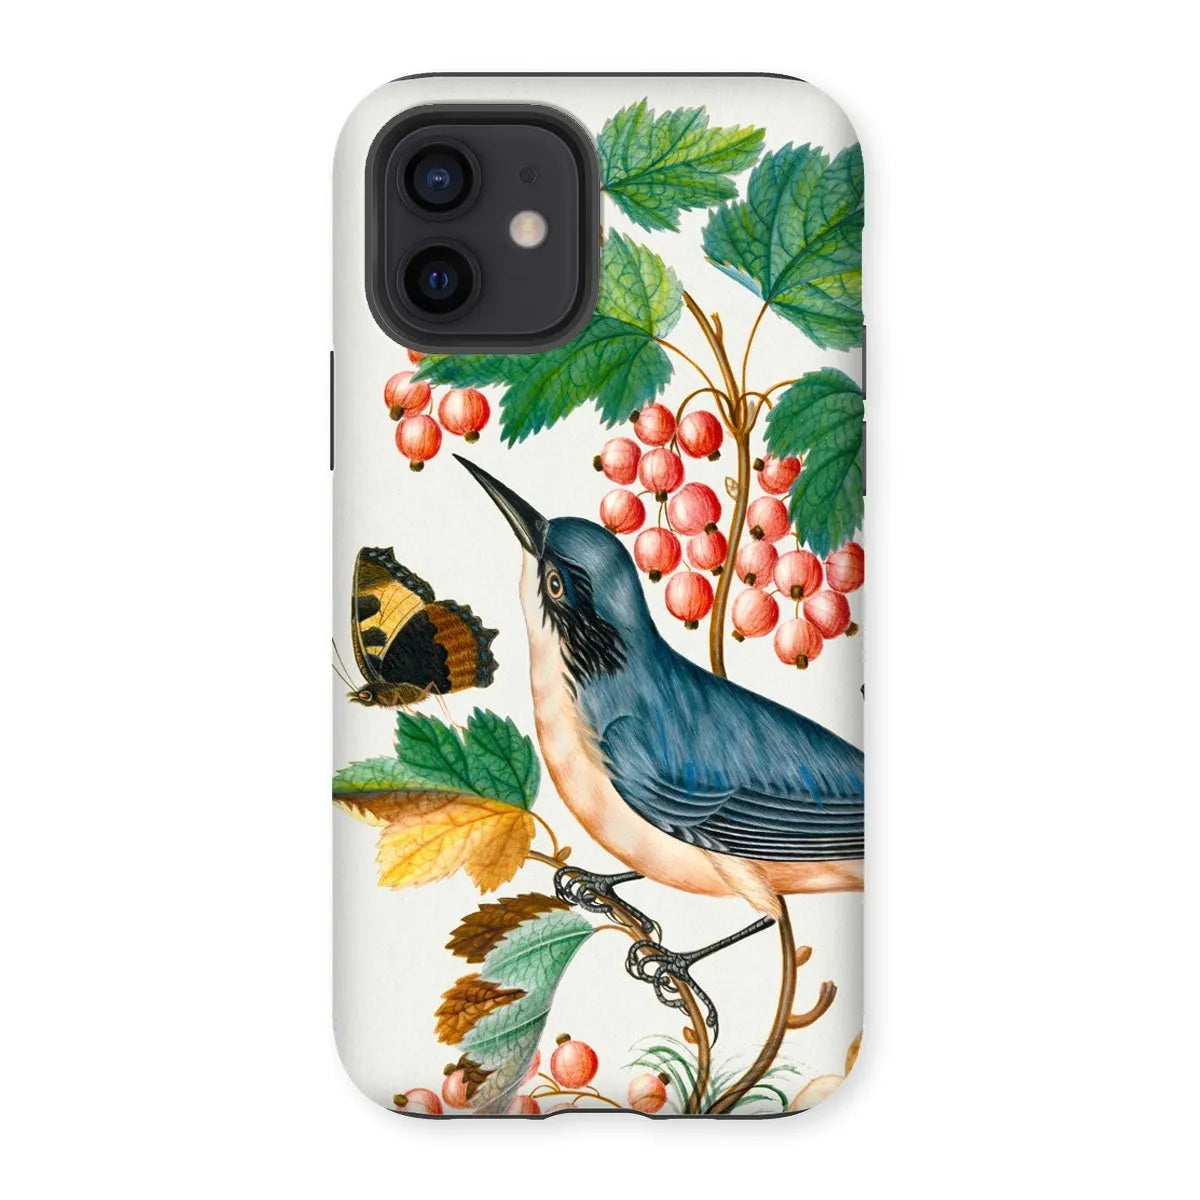 Warbler Admiral Wasps & Ants - Art Phone Case - James Bolton - Iphone 12 / Matte - Mobile Phone Cases - Aesthetic Art